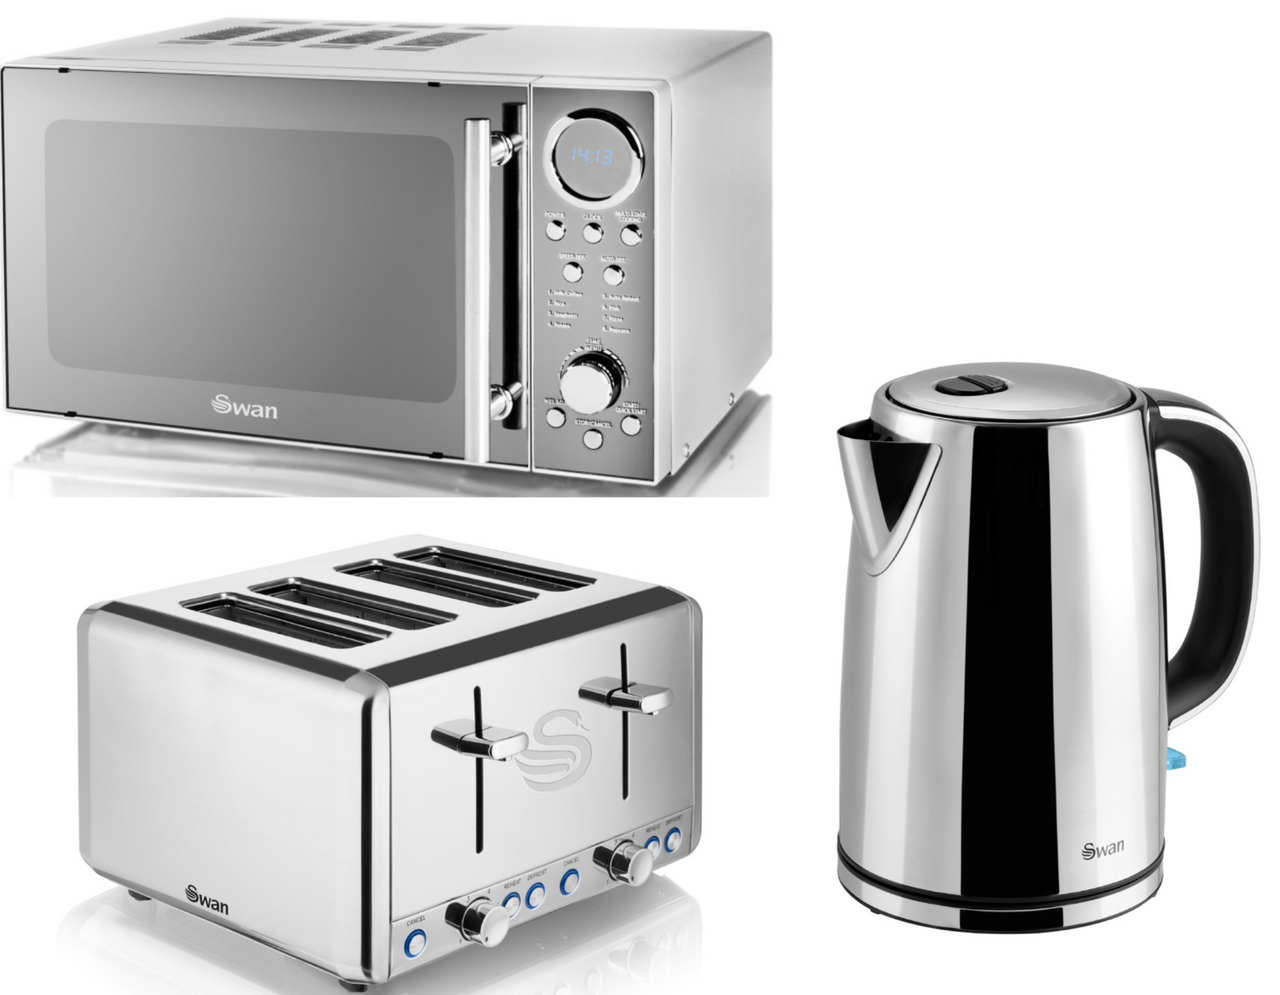 Swan Classics Silver 1.7L Jug Kettle, 4 Slice Toaster & 800W 20L Microwave in Polished Stainless Steel